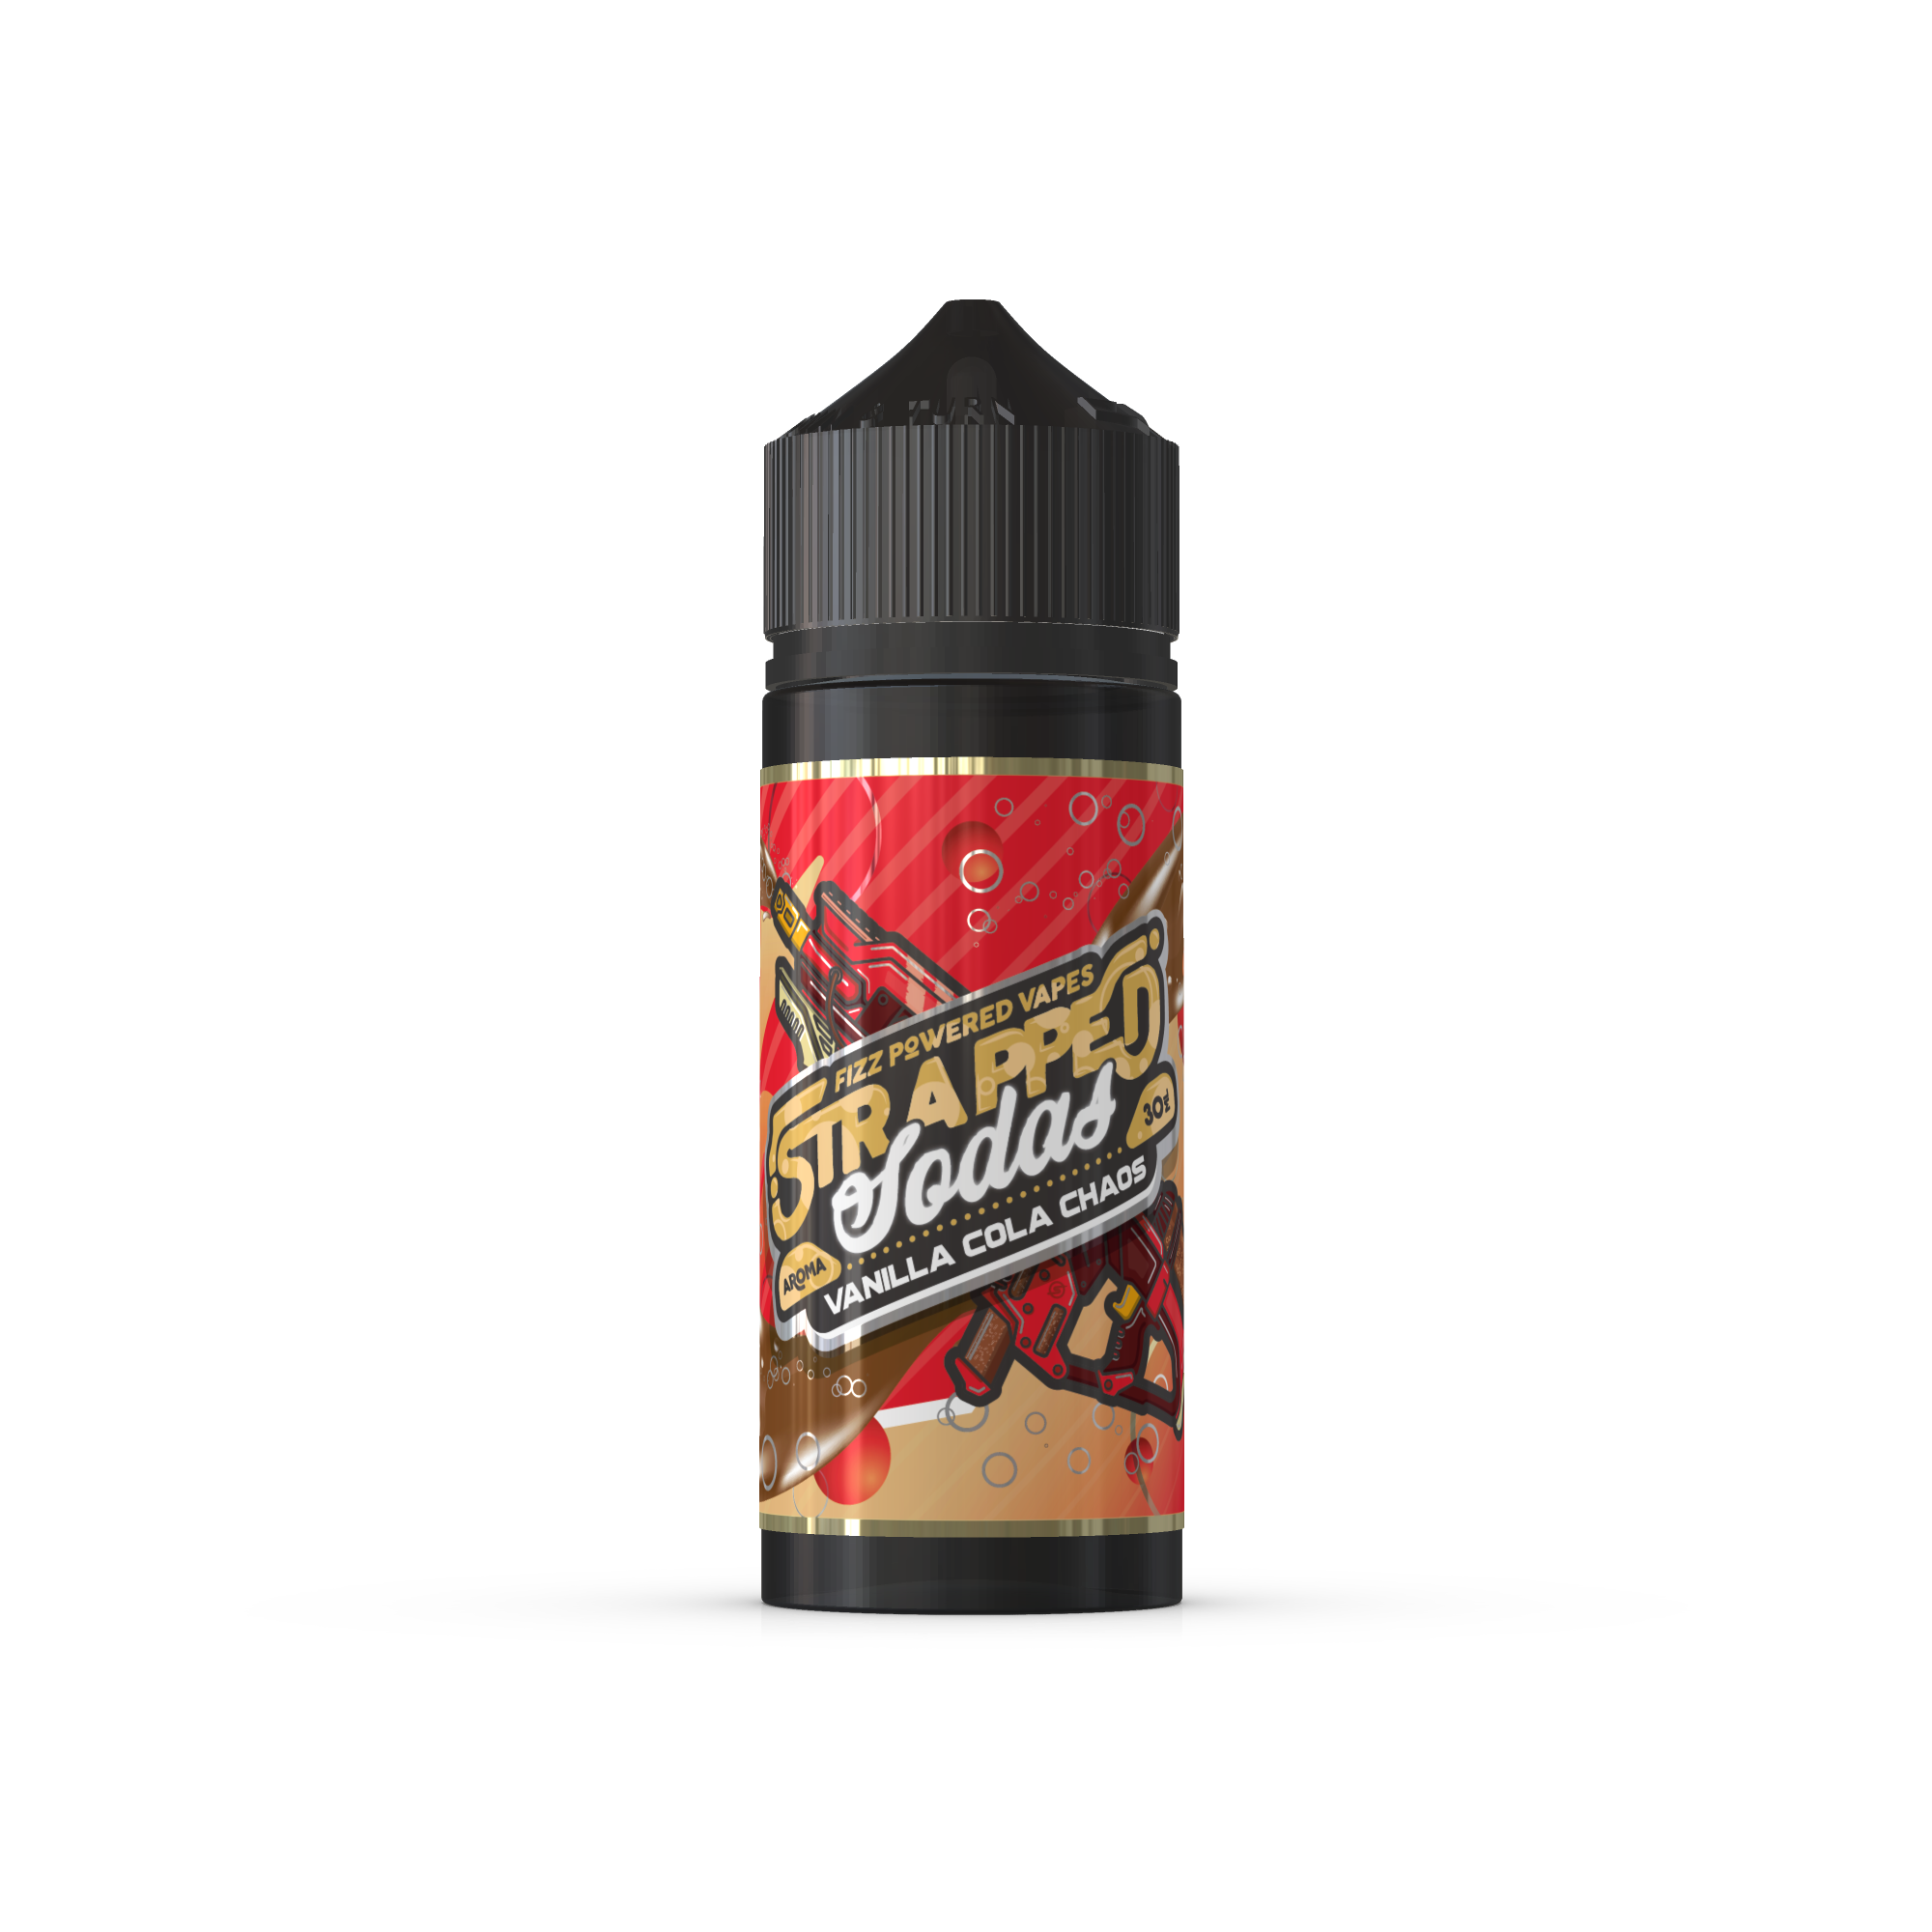 Strapped Soda - Vanille Cola Chaos Aroma 30ml